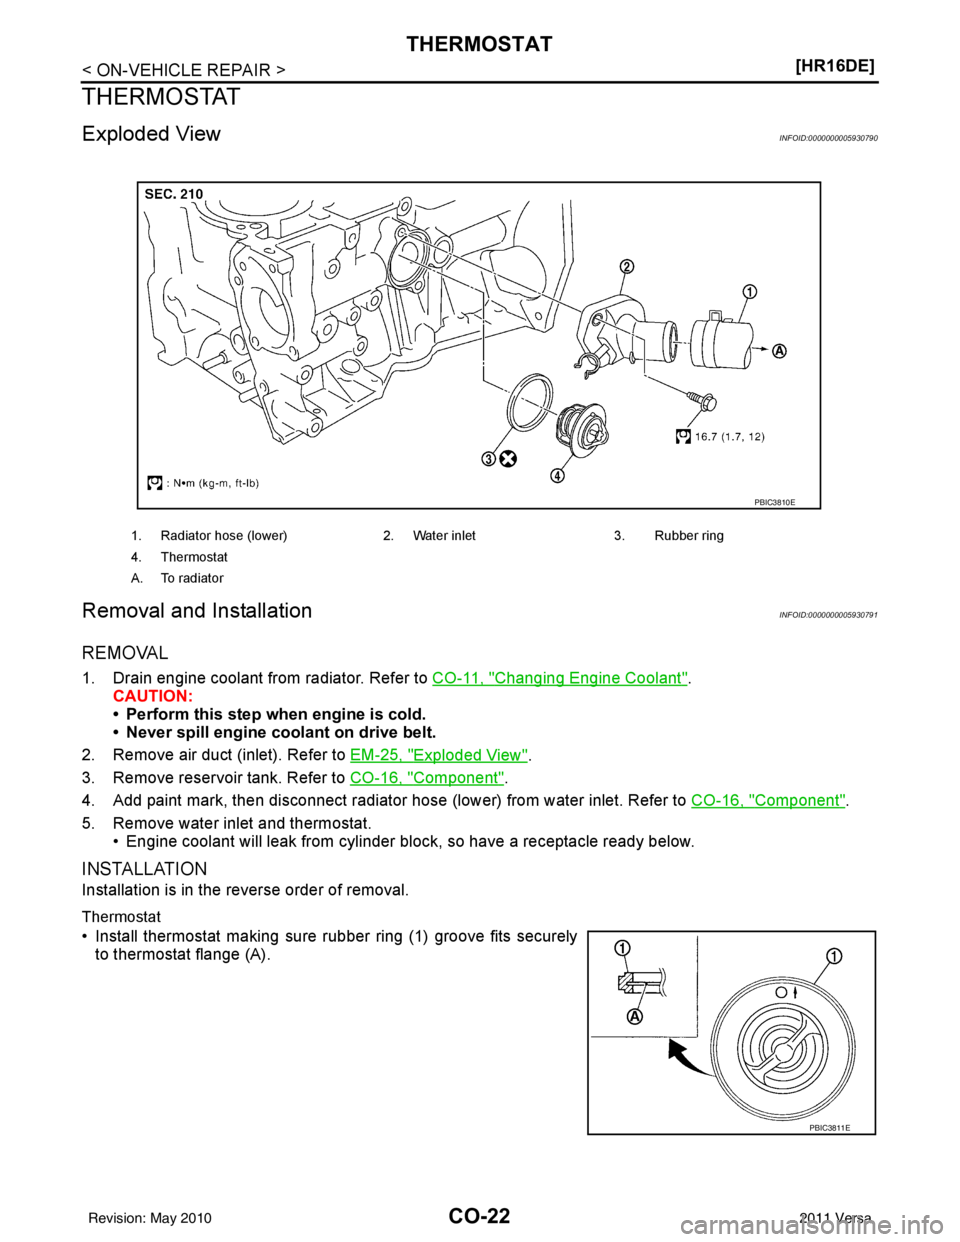 NISSAN TIIDA 2011  Service Repair Manual CO-22
< ON-VEHICLE REPAIR >[HR16DE]
THERMOSTAT
THERMOSTAT
Exploded ViewINFOID:0000000005930790
Removal and InstallationINFOID:0000000005930791
REMOVAL
1. Drain engine coolant from radiator. Refer to 
